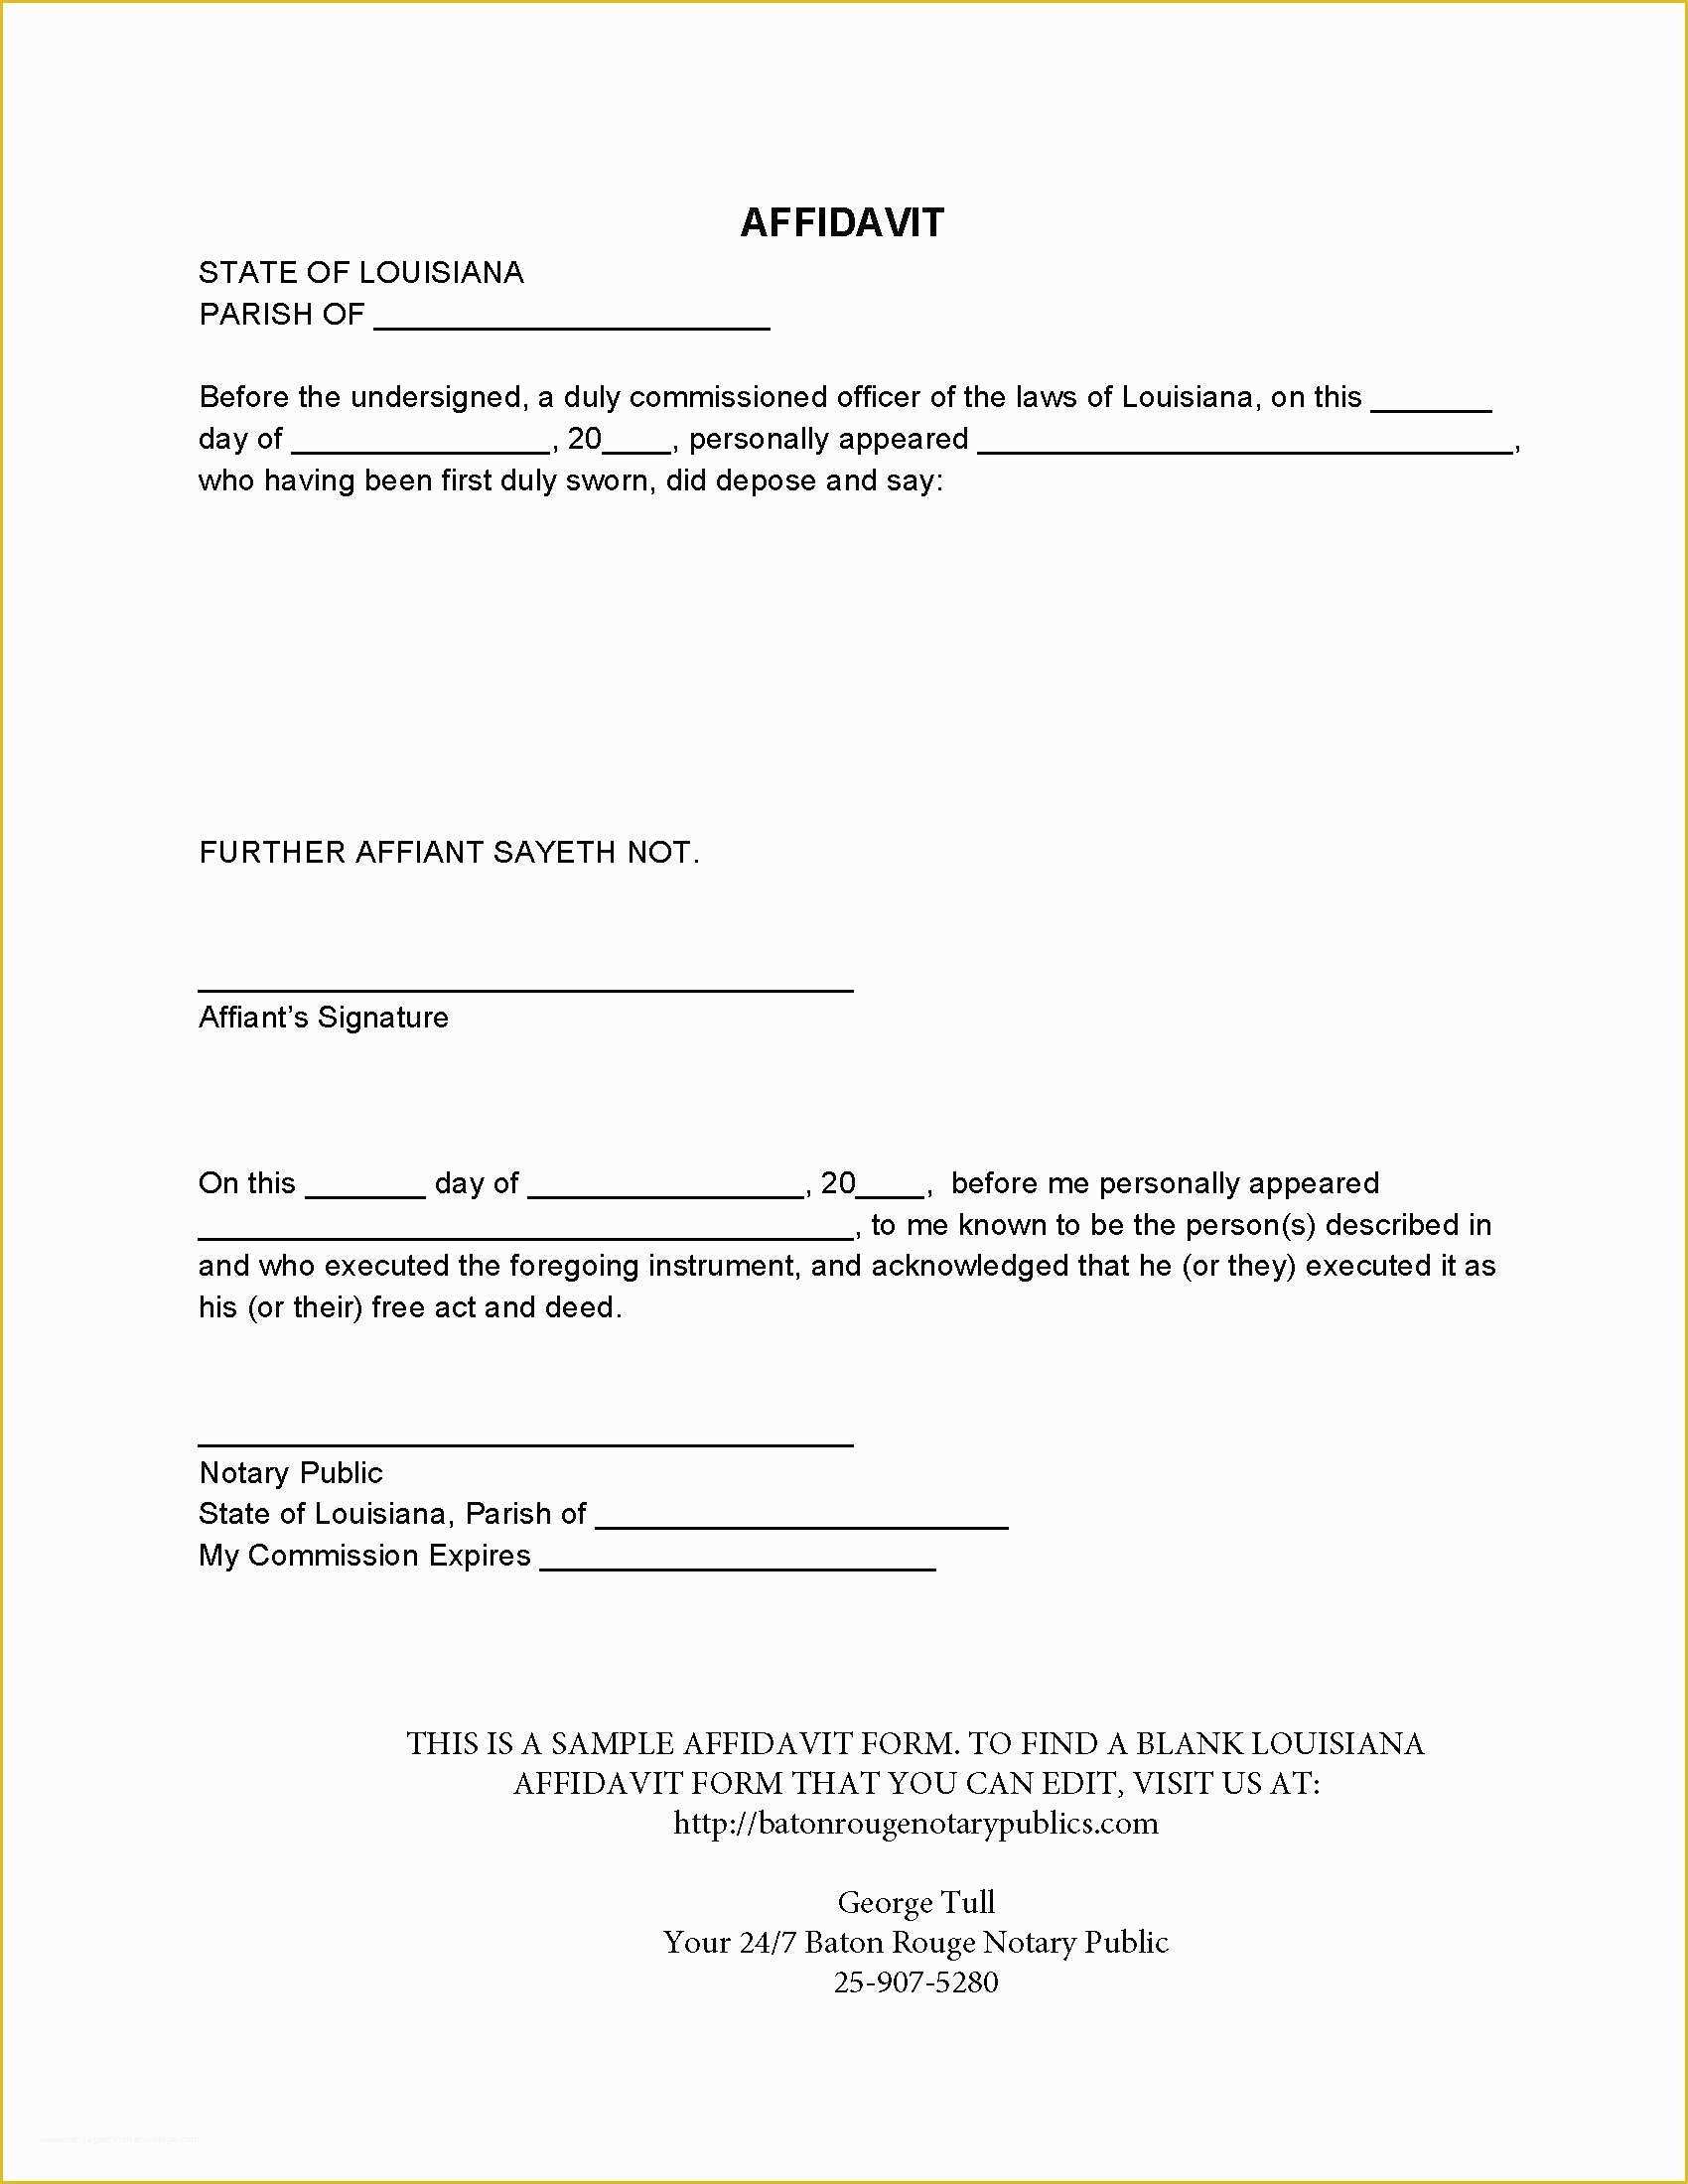 California Drug Free Workplace Policy Template Of Very Simple Affidavit form Template Example Featuring some